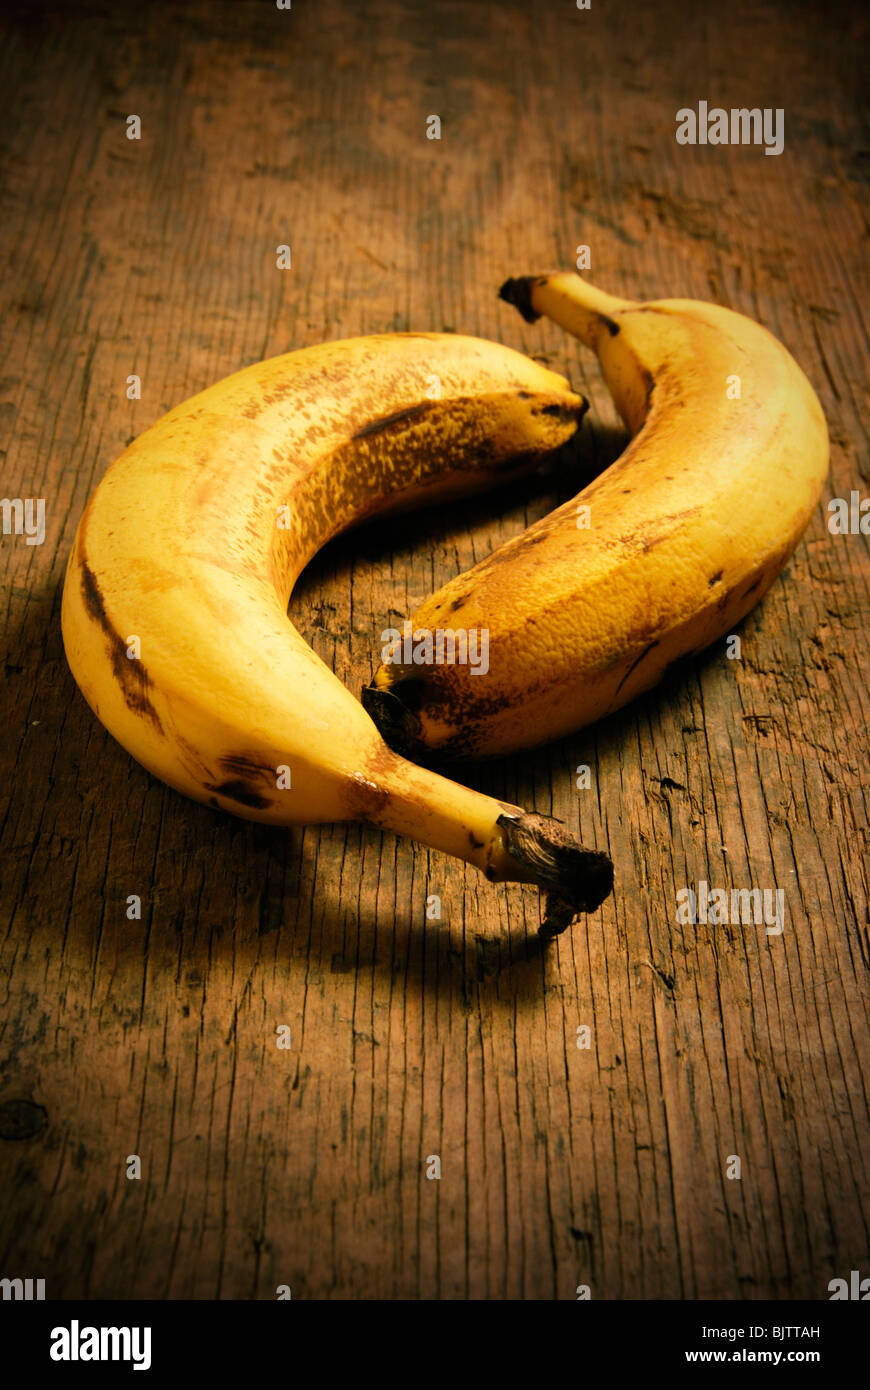 two bananas lying on an old wood table Stock Photo